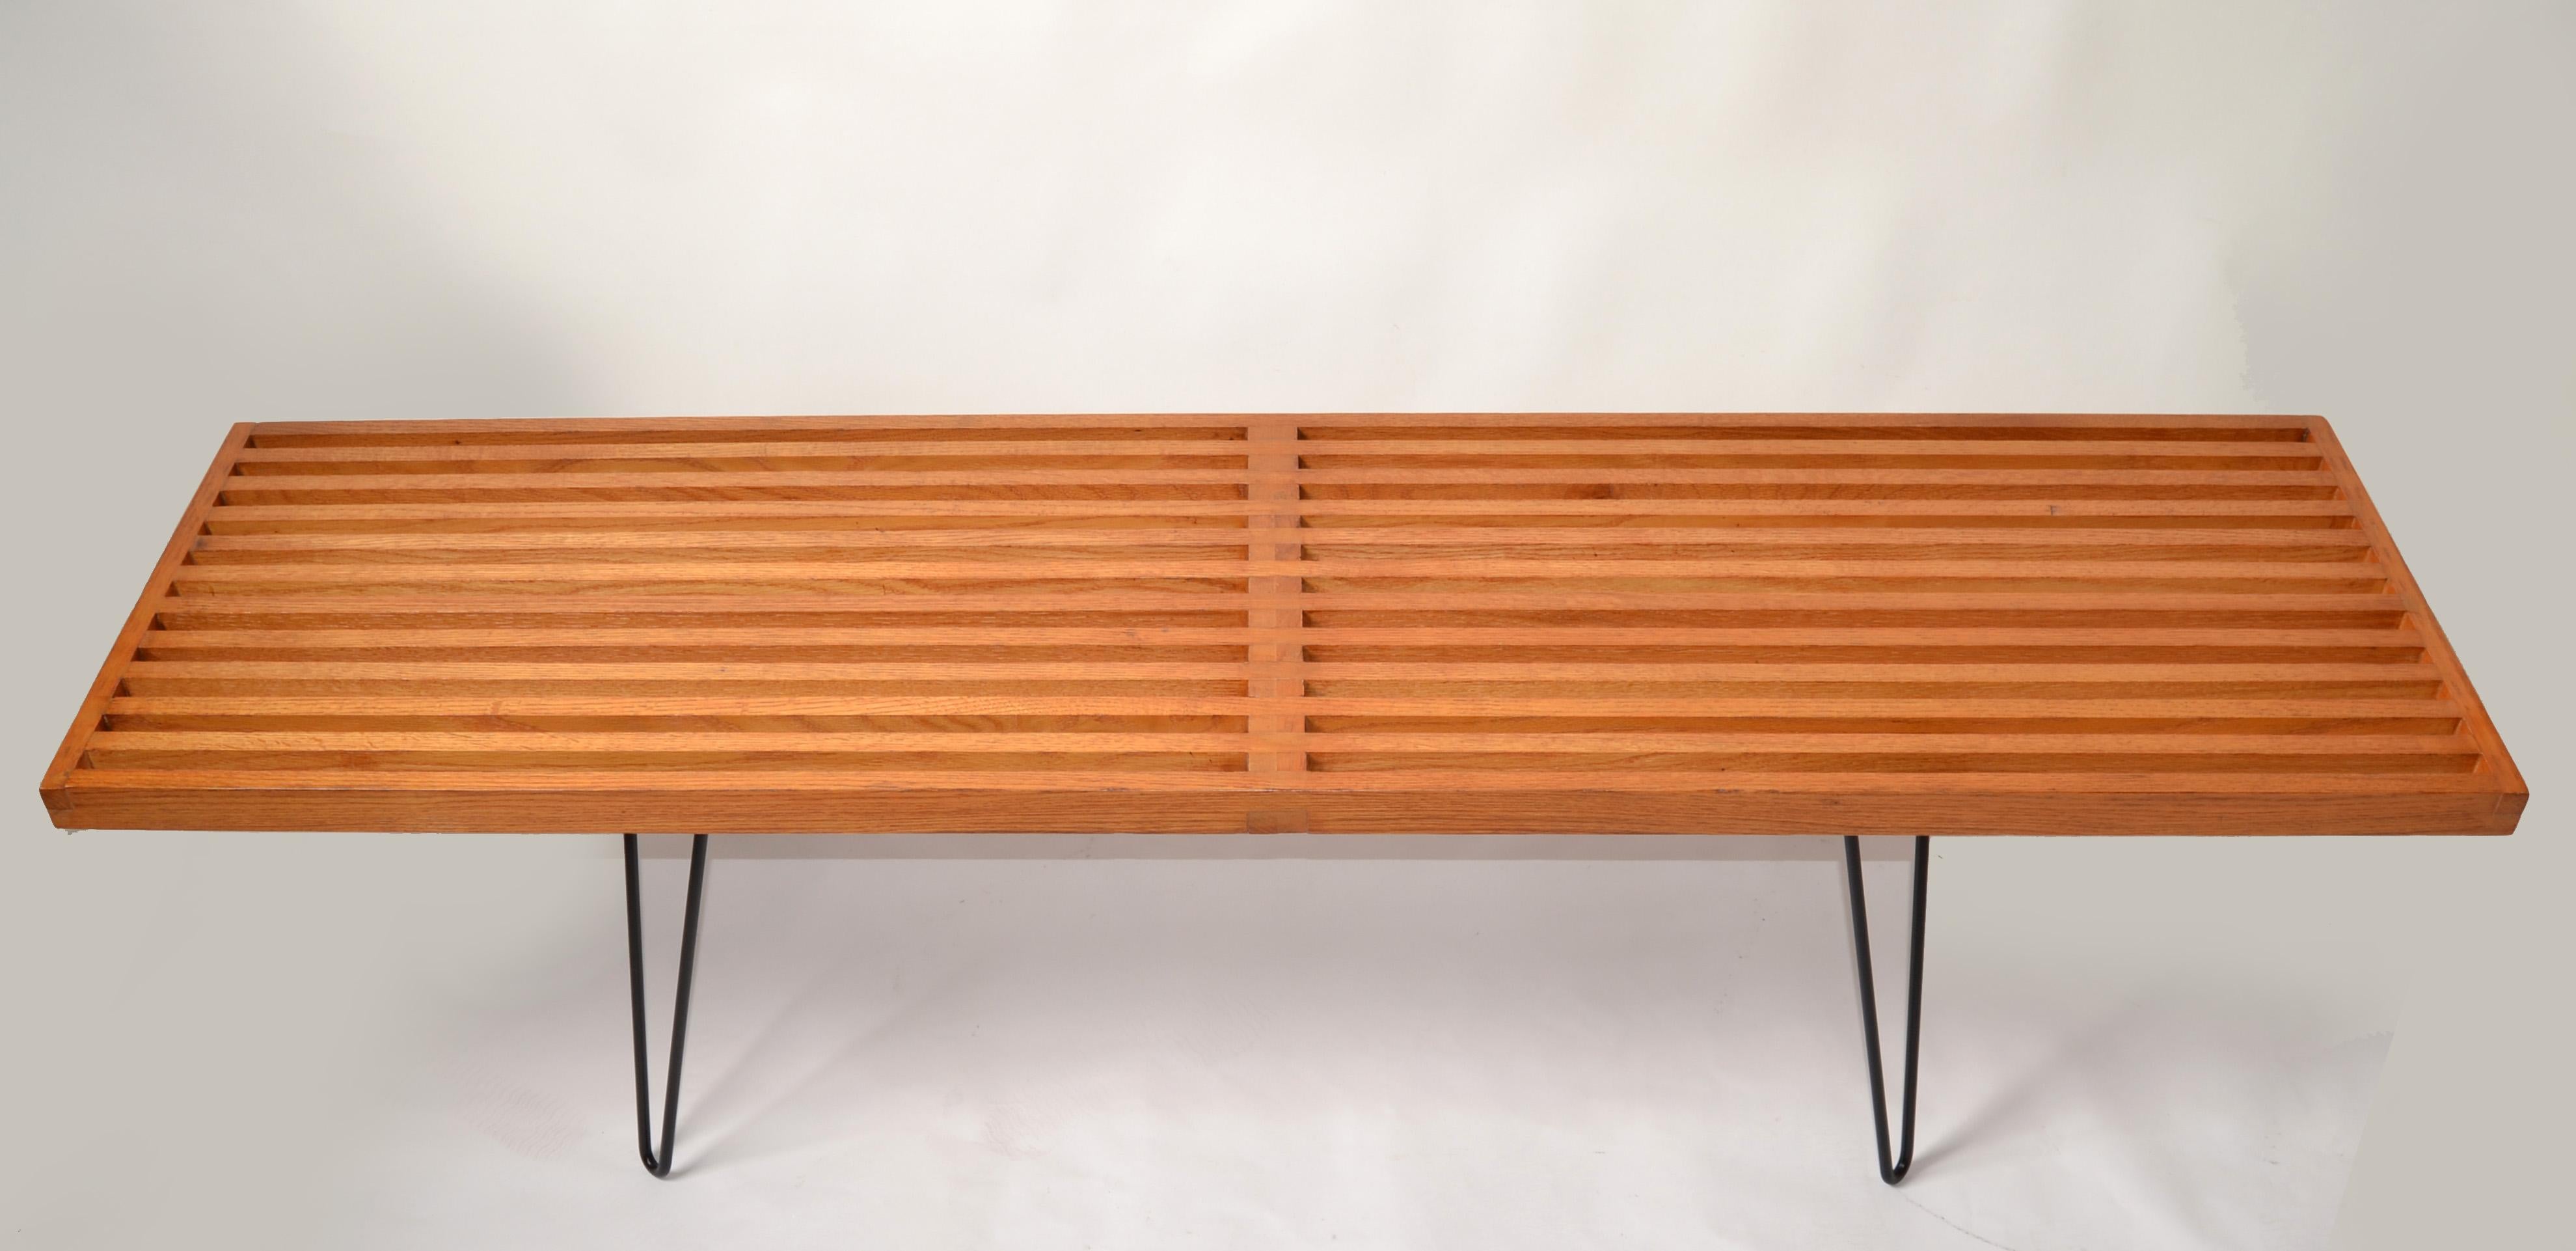 George Nelson Style Oak Slat Bench With Steel Hairpin Legs Attributed to Knoll For Sale 8